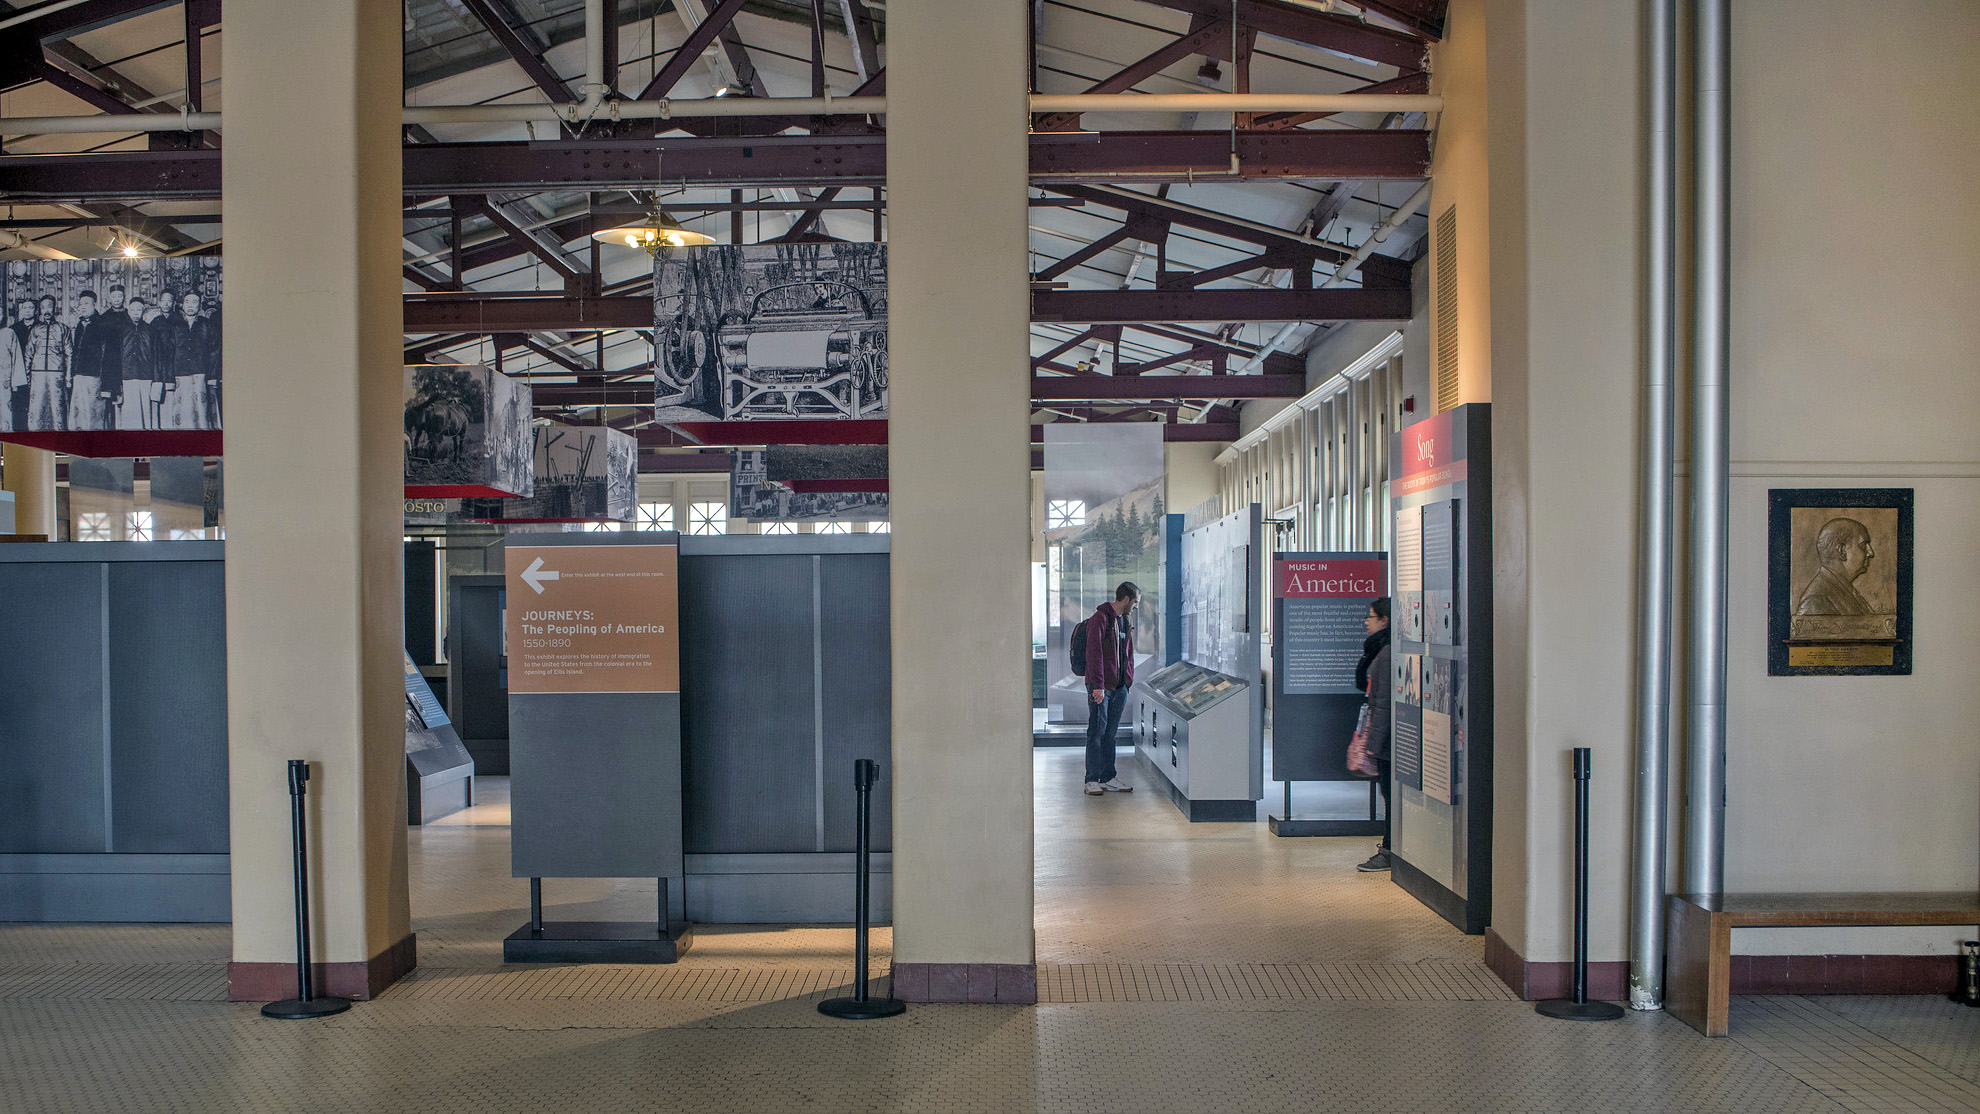 An inside view of the Ellis Island Immigration Museum.